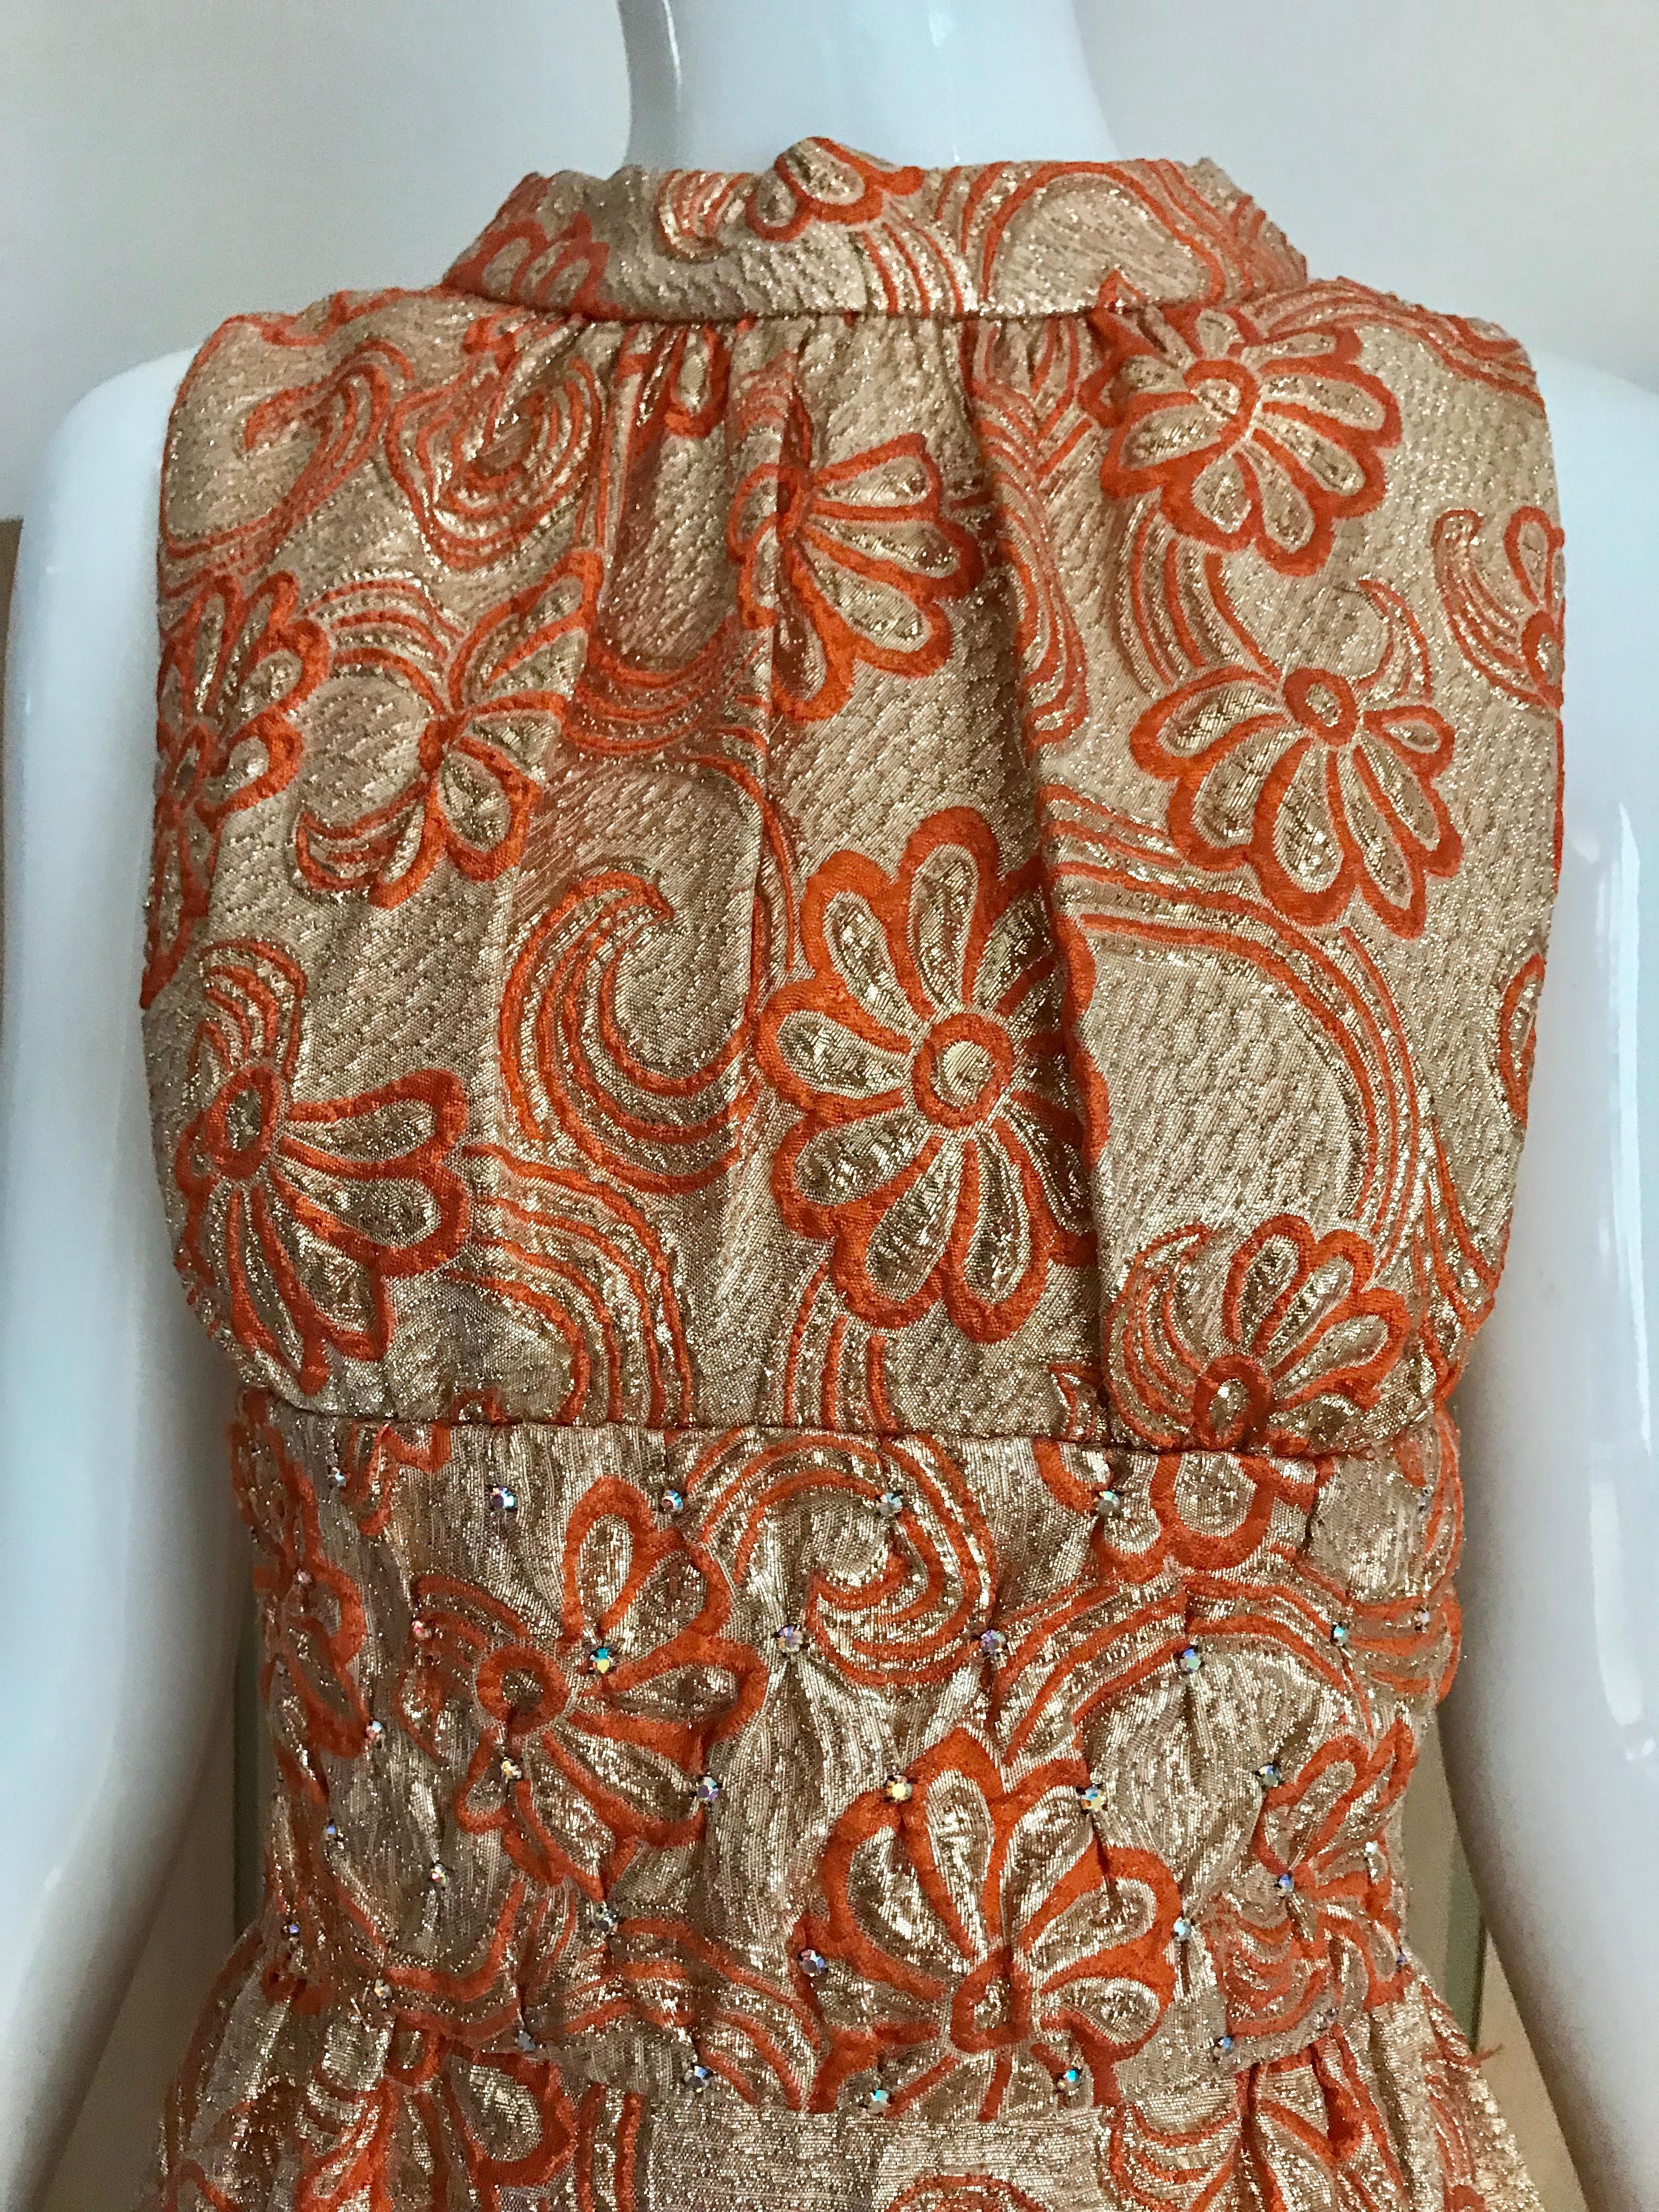 Vintage 1960s Orange and Gold brocade sleeveless maxi evening dress. Dress is lined in cotton.
Size: 4 or small
Bust: 36 inches/ Waist: 26 inches/ Hip: 42 inches/ Dress length: 51 inches